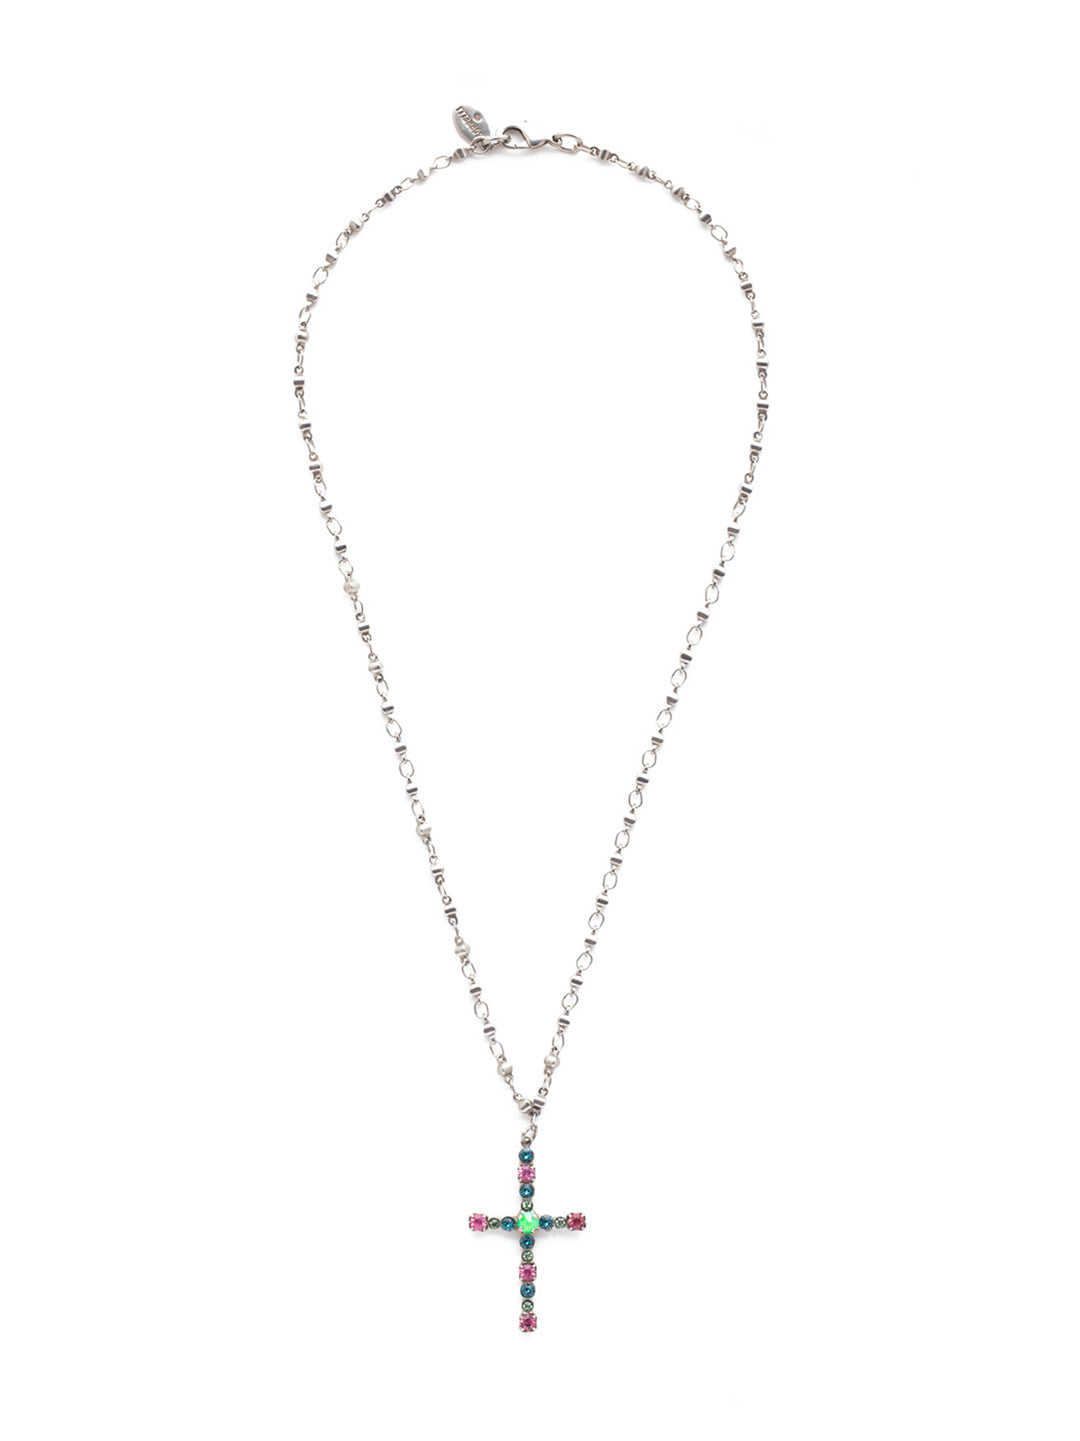 Charmaine Cross Pendant Necklace - NEX2ASWDW - <p>Perfect for any occasion, the Charmaine Cross Pendant Necklace spotlights a crystal studded cross on an adjustable chain. From Sorrelli's Wild Watermelon collection in our Antique Silver-tone finish.</p>